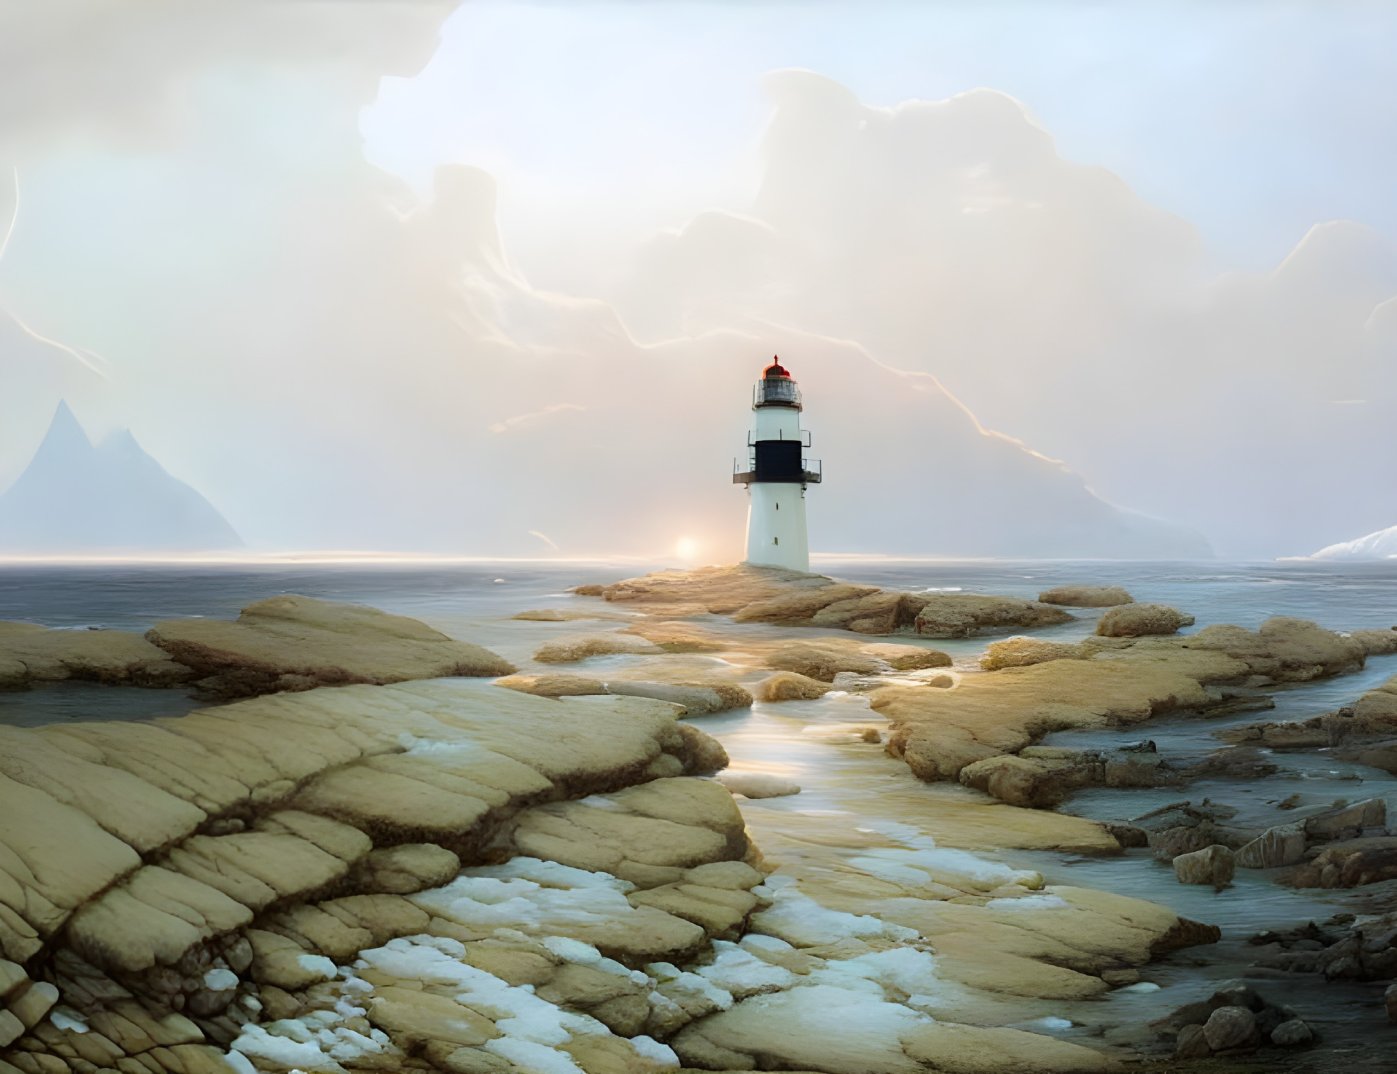 Tranquil landscape with lighthouse on icy shores at sunset